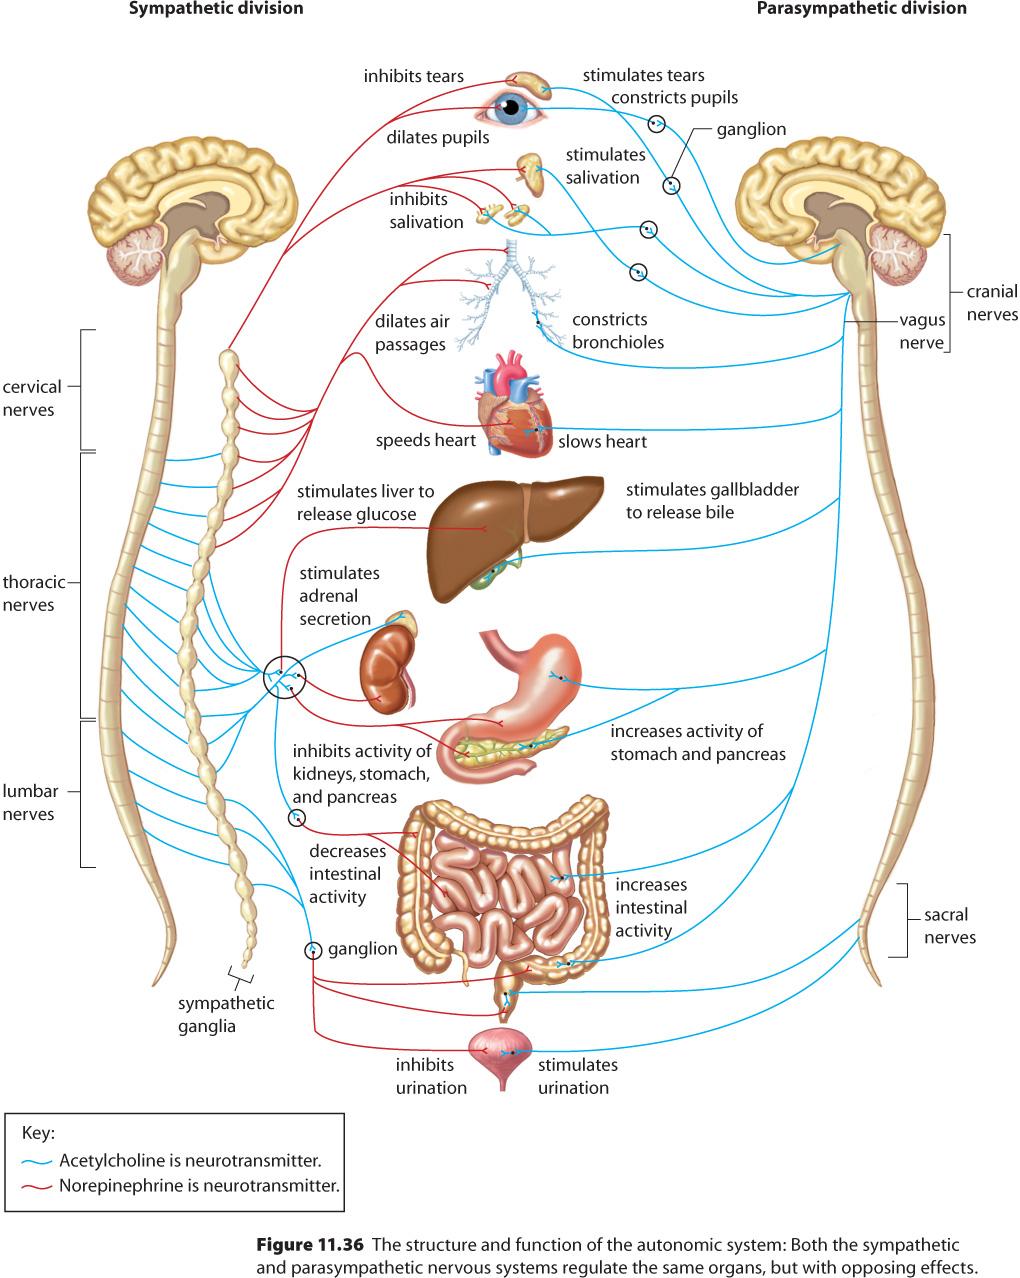 Autonomic nervous system Controls glandular secre6ons, the cardiac muscle and smooth muscles Controlled by the hypothalamus and medulla oblongata Comprises two opposing subsystems: sympathe6c and